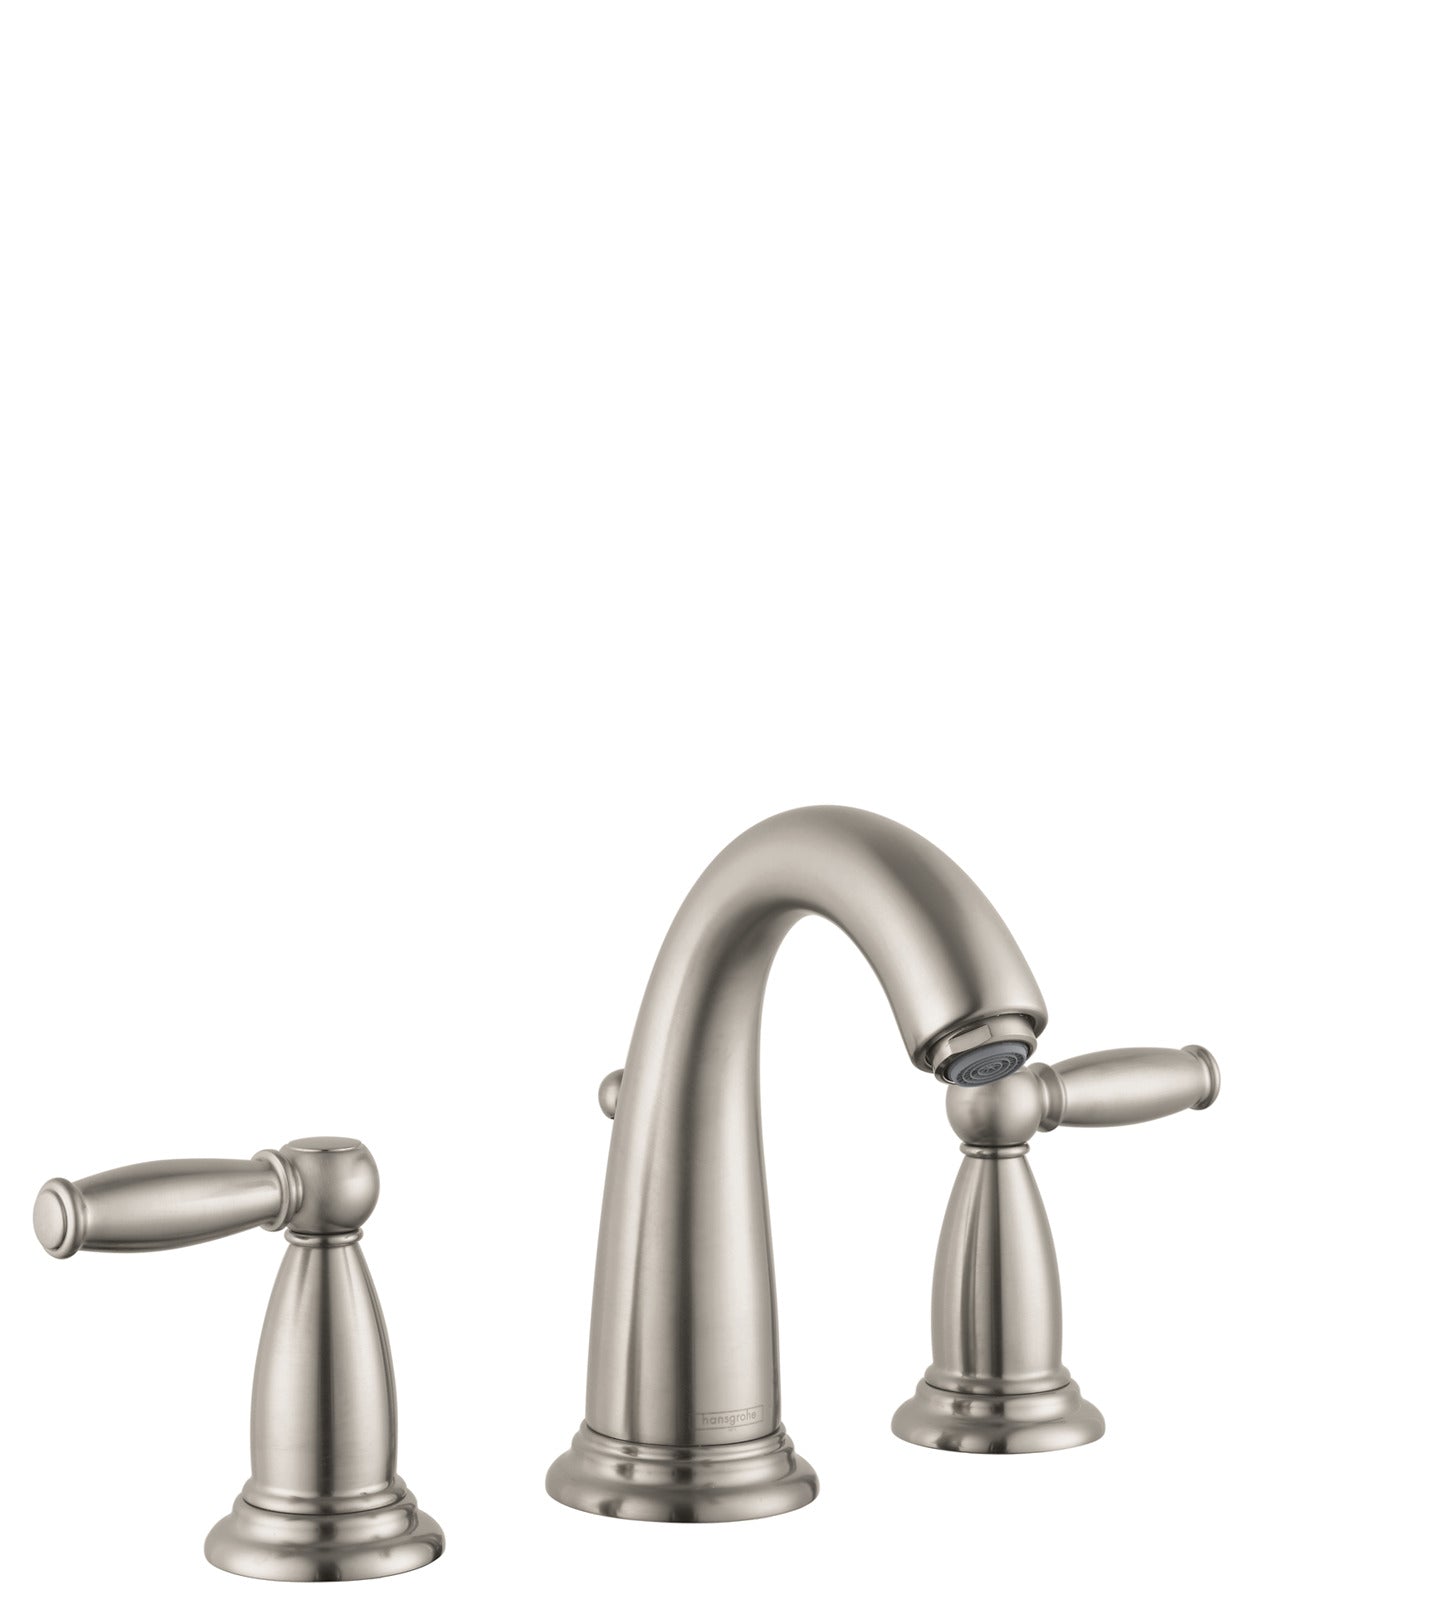 HANSGROHE 06117820 Swing C Widespread Faucet with Pop-Up Drain, 1.2 GPM in Brushed Nickel